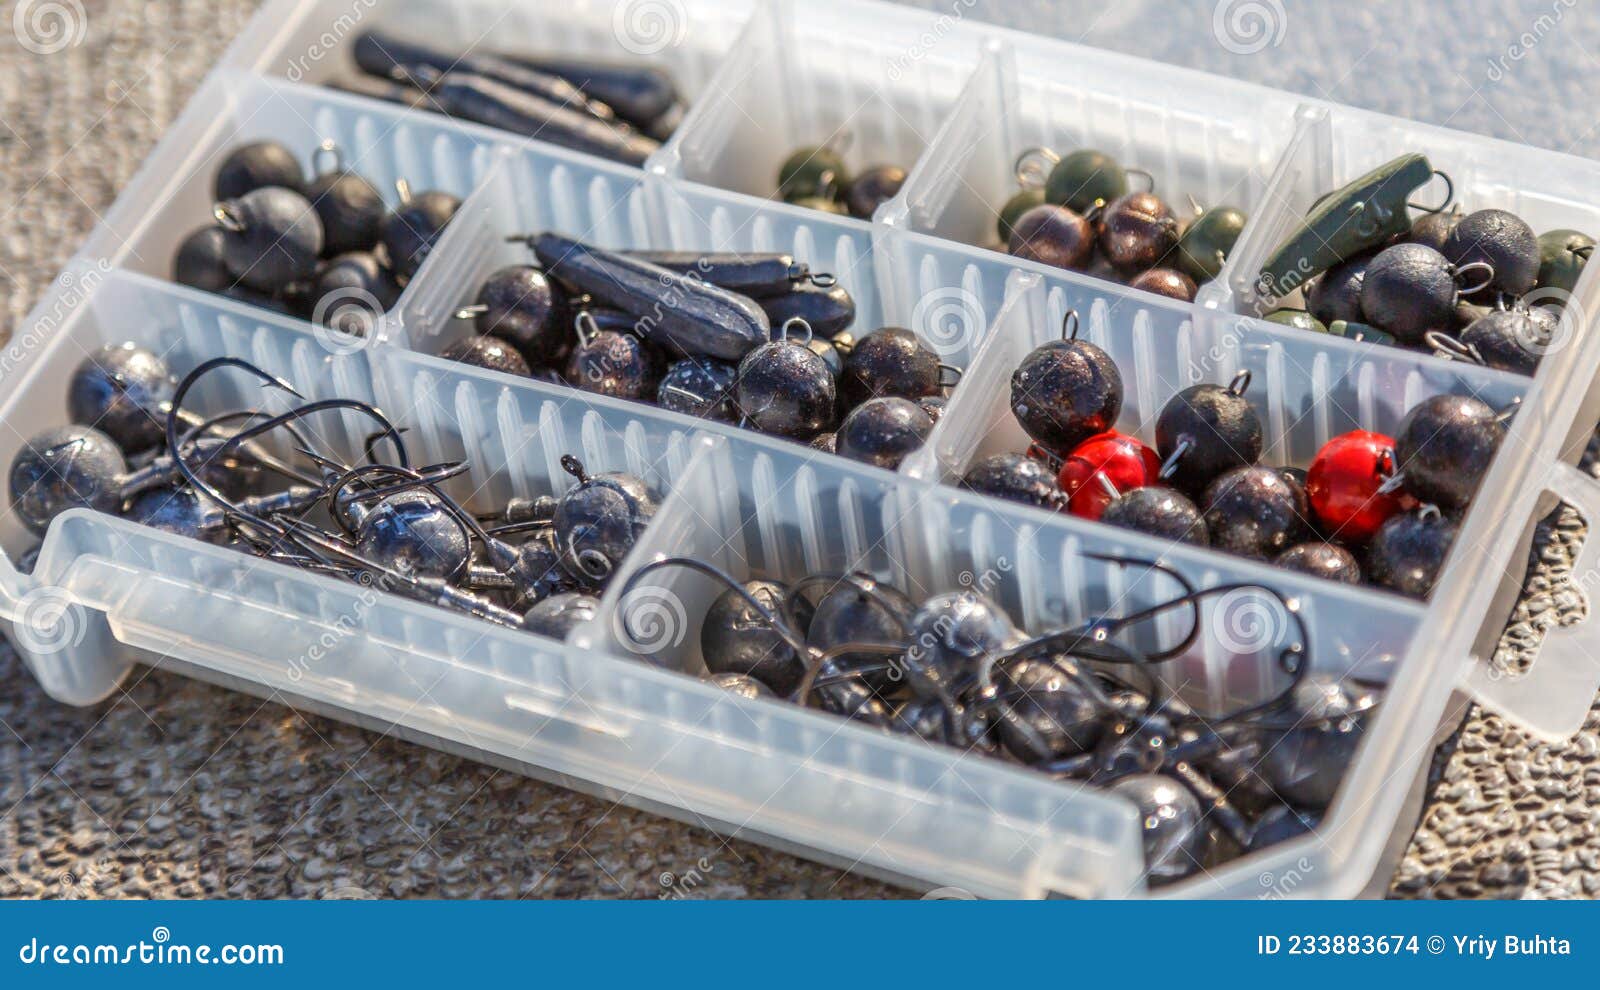 https://thumbs.dreamstime.com/z/large-fisherman-s-tackle-box-fully-stocked-lures-gear-fishing-accessories-background-233883674.jpg